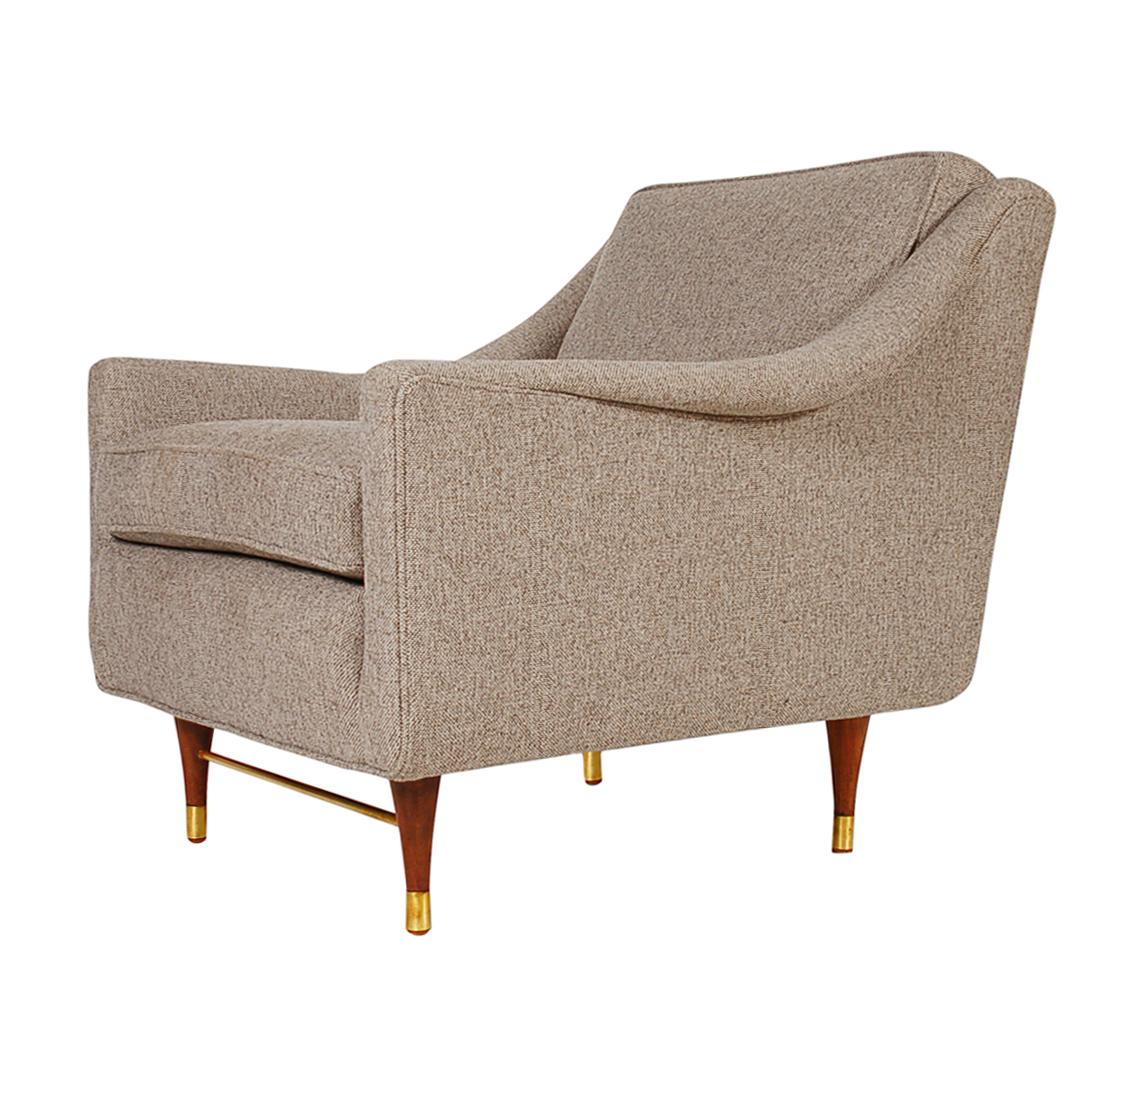 Mid-Century Modern Lounge or Club Chairs After Edward Wormley for Dunbar 2